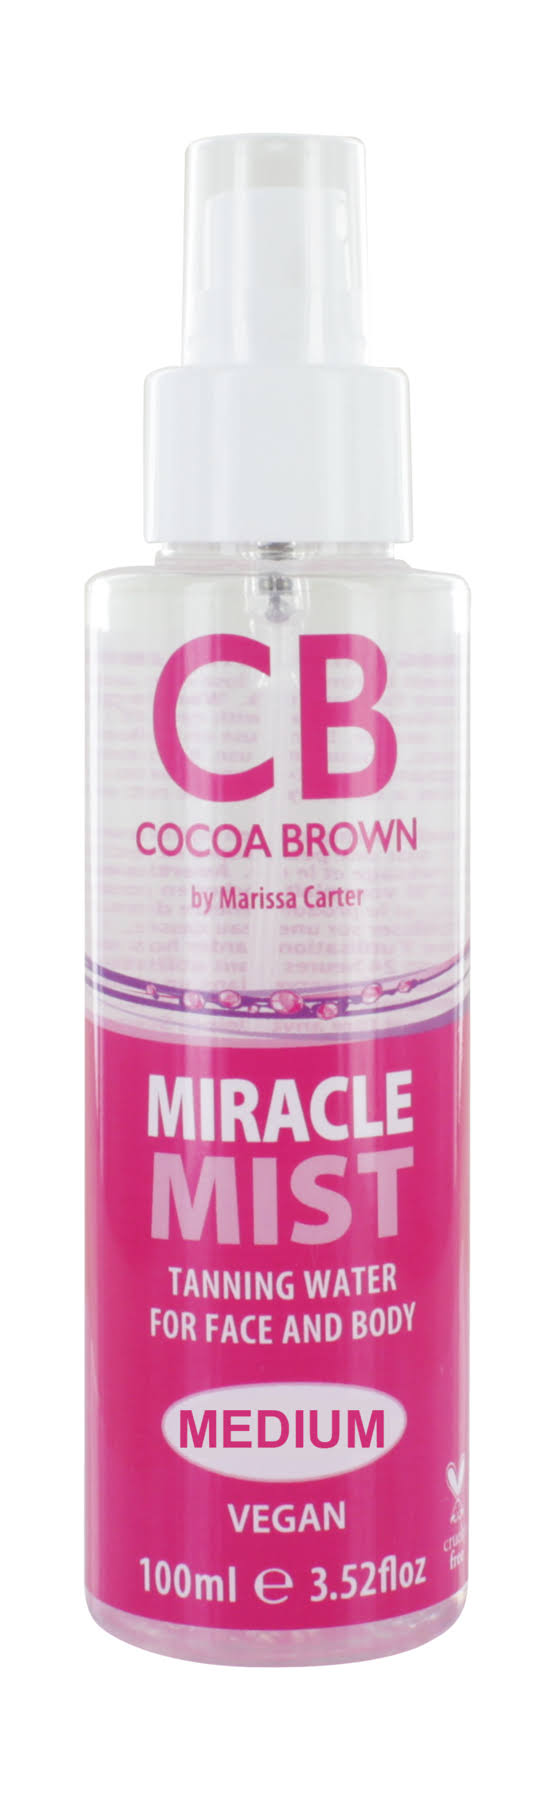 Cocoa Brown Miracle Mist Tanning Water - Medium